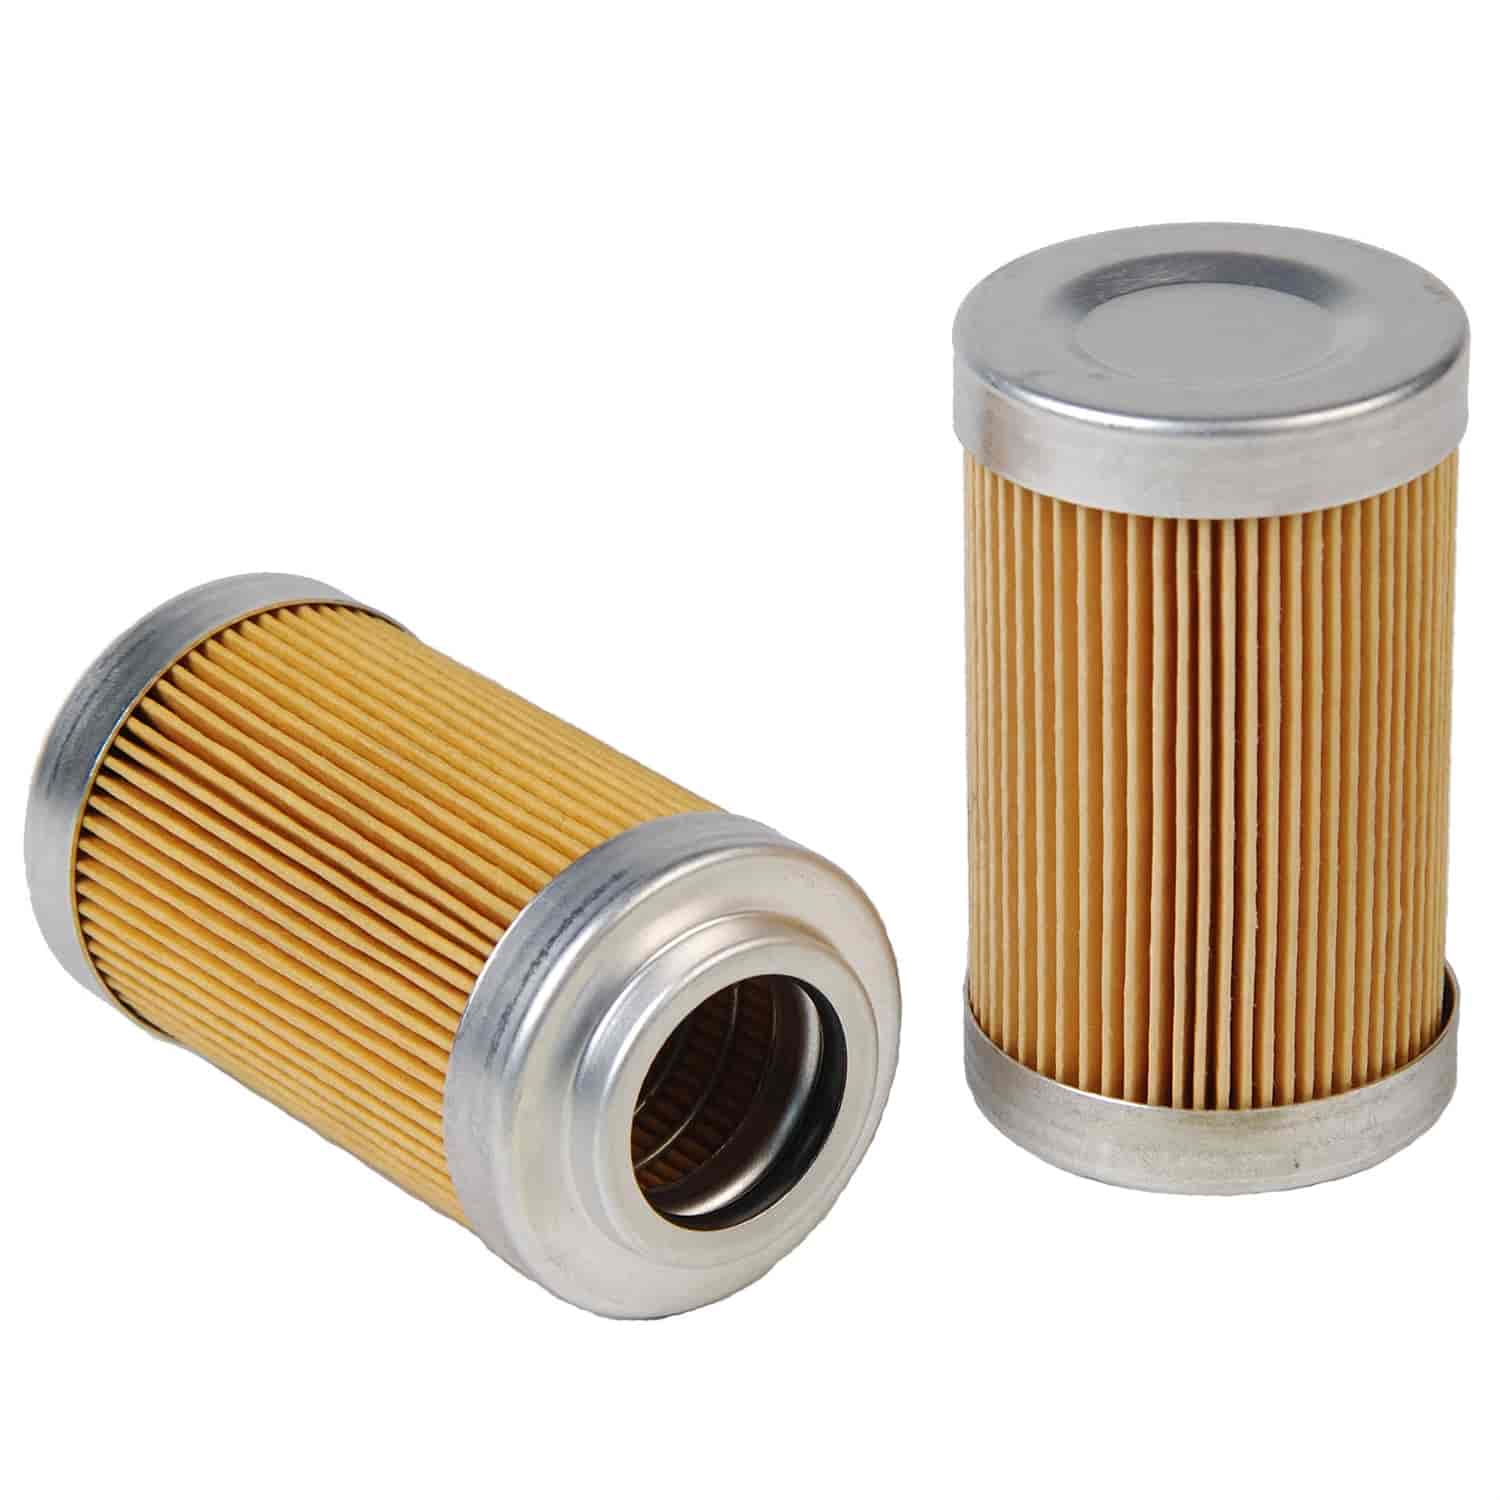 Replacement Fuel Filter Element 10 micron for part #027-12301, 12306, 12351, 12321